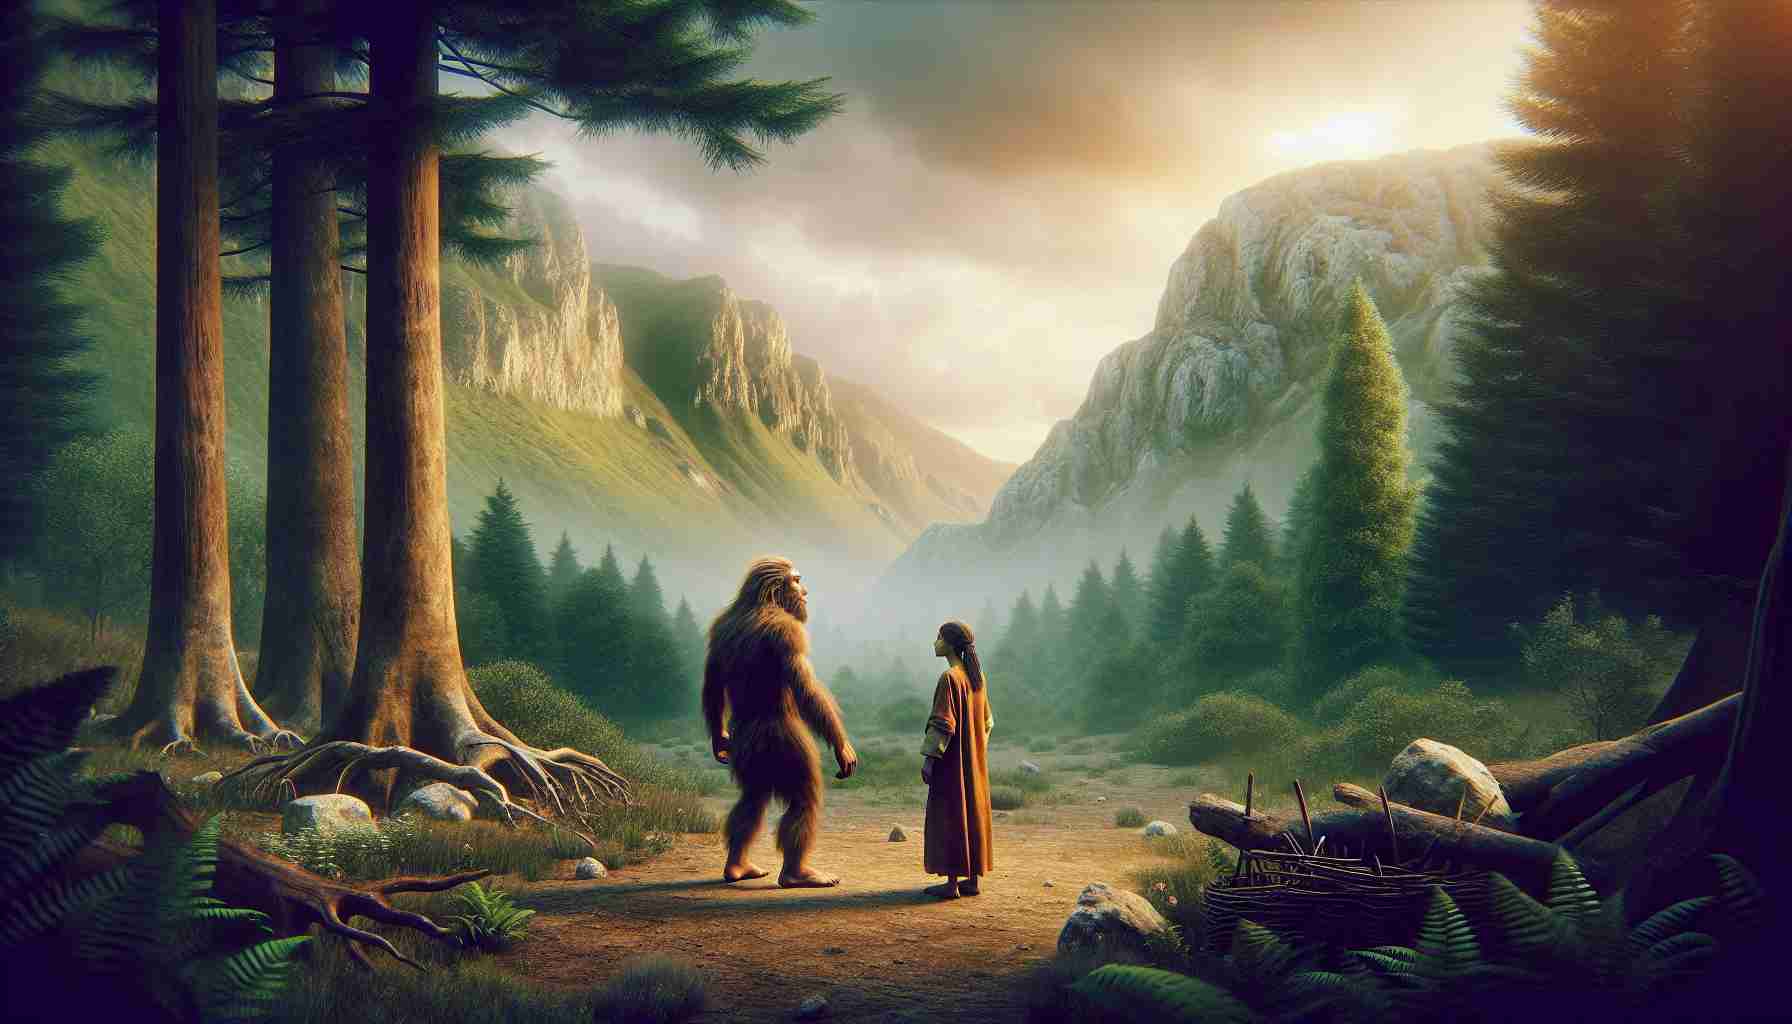 Generate a realistic high-definition image that demonstrates the shared history of modern humans and Neanderthals. The scene could depict a male Neanderthal and a female modern human, both of Middle-Eastern descent, coming together in a peaceful exchange or collaboration in a prehistoric wilderness setting. The atmosphere should be tranquil and contemplative, suggestive of the immeasurable passage of time and the complex, intertwined destinies of these two human species. Feature natural elements, like dense forests, craggy mountains, or open plains, in the background to further emphasize the ancient timeline.